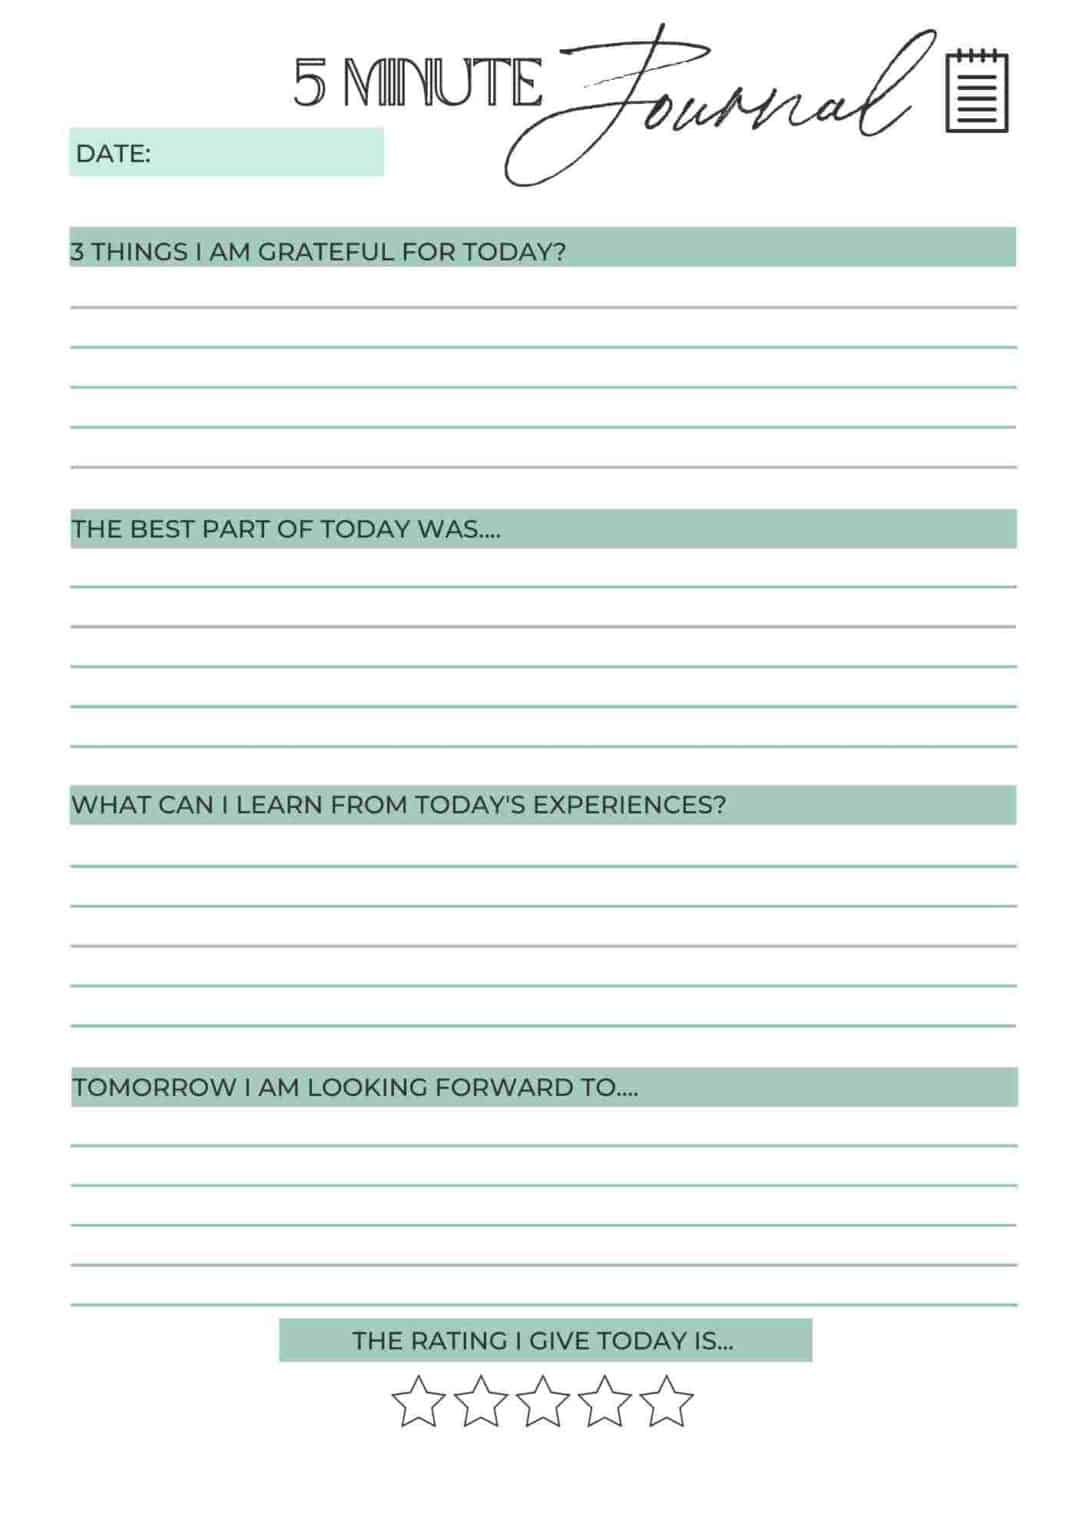 Self Esteem Exercise Worksheet for Life Coach | Life Coaching Tools ...